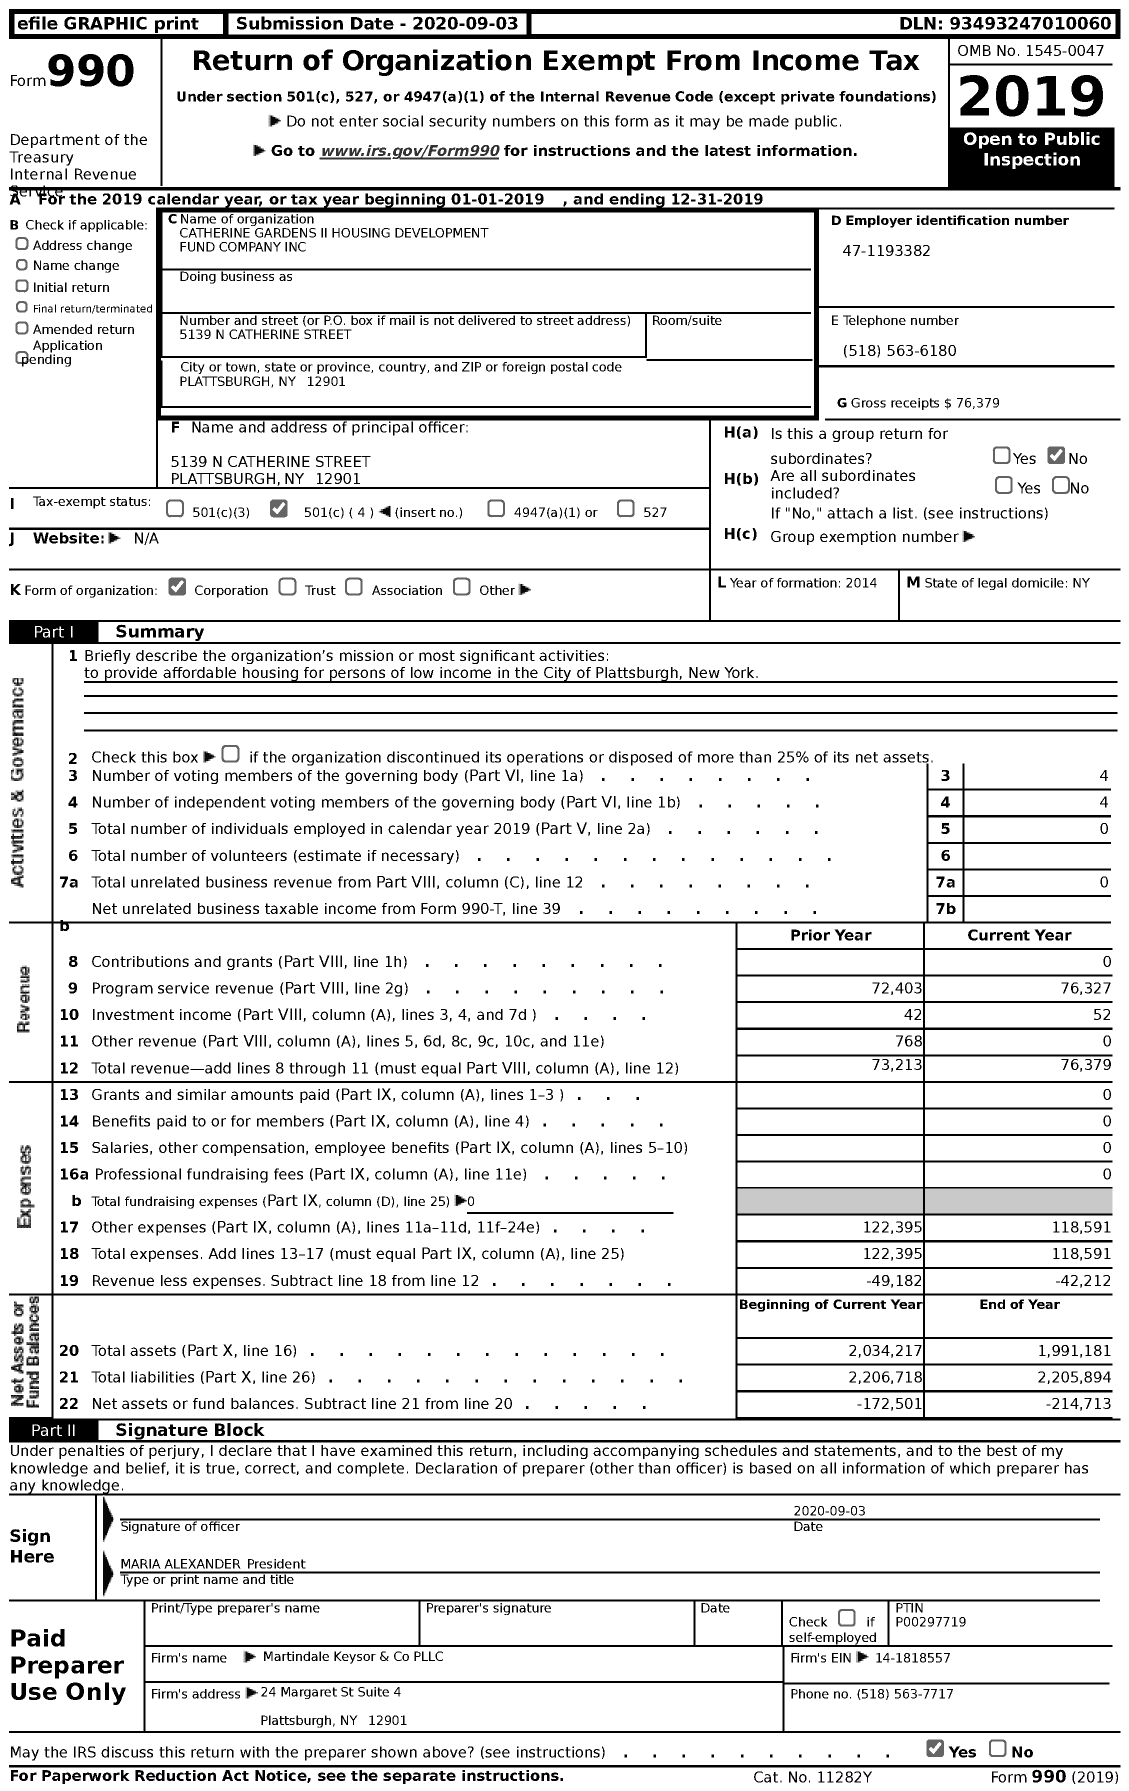 Image of first page of 2019 Form 990 for Catherine Gardens Ii Housing Development Fund Company